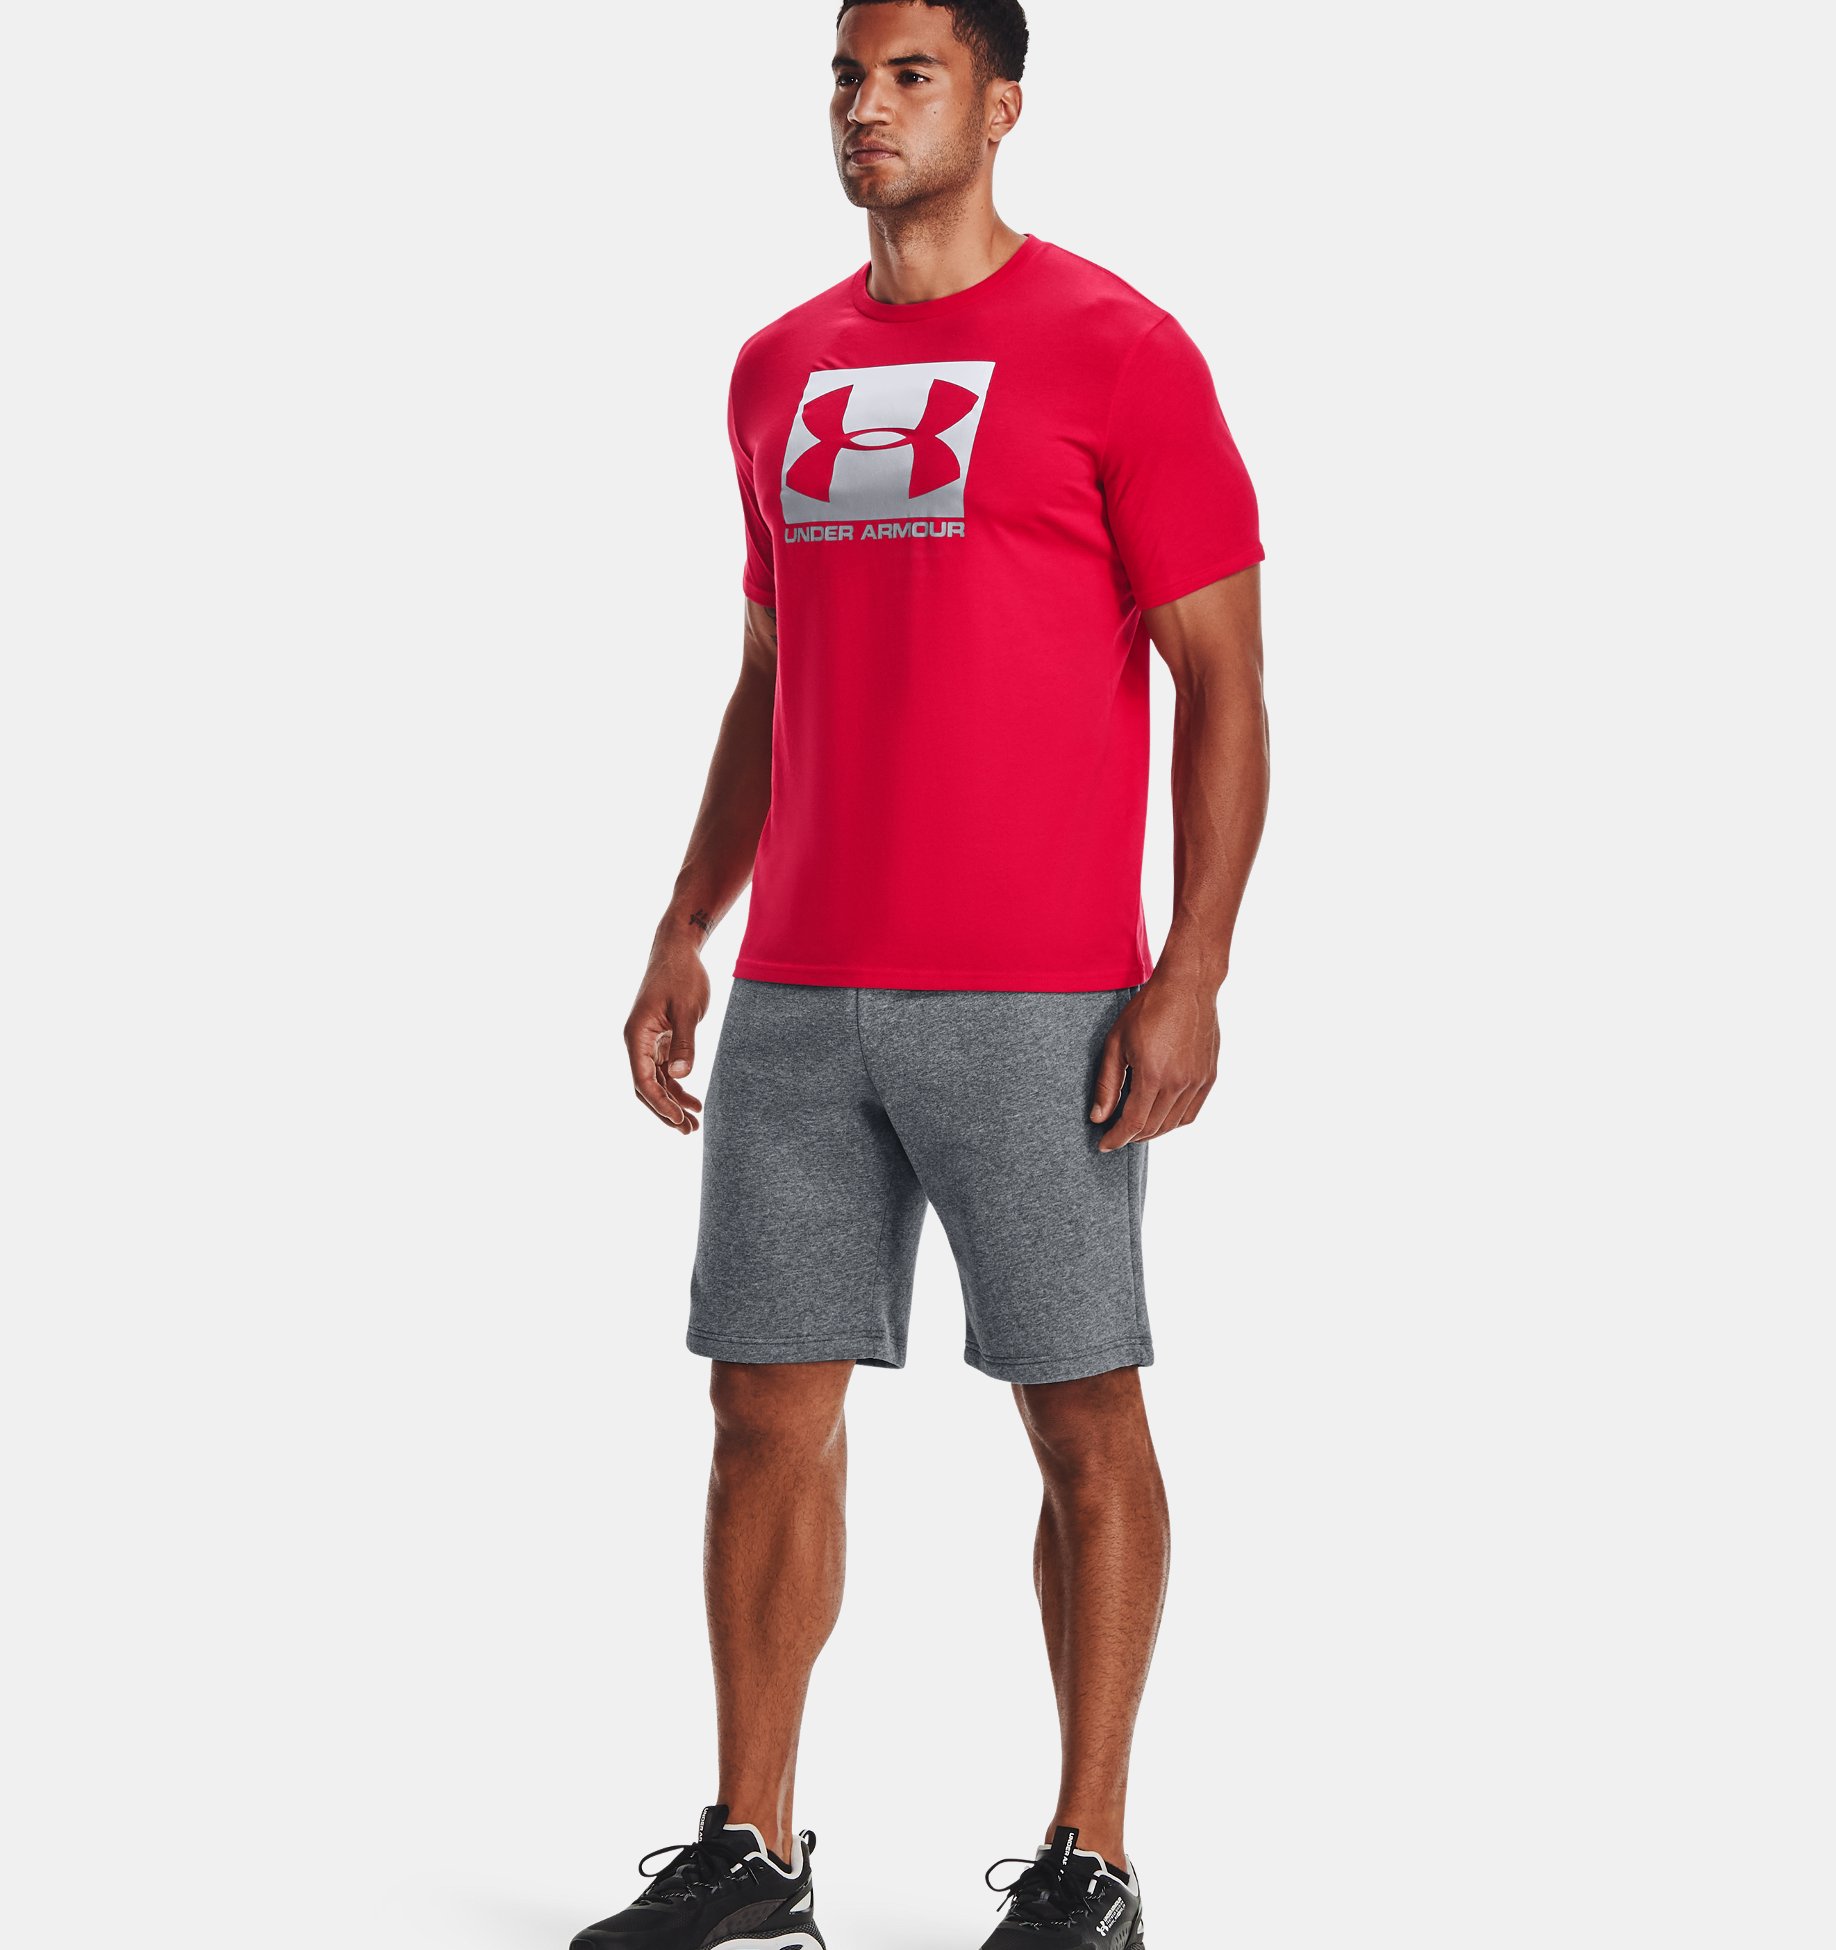 Under Armour Homme Charged Cotton T Shirt Tee Top-Noir Sport Running Gym 